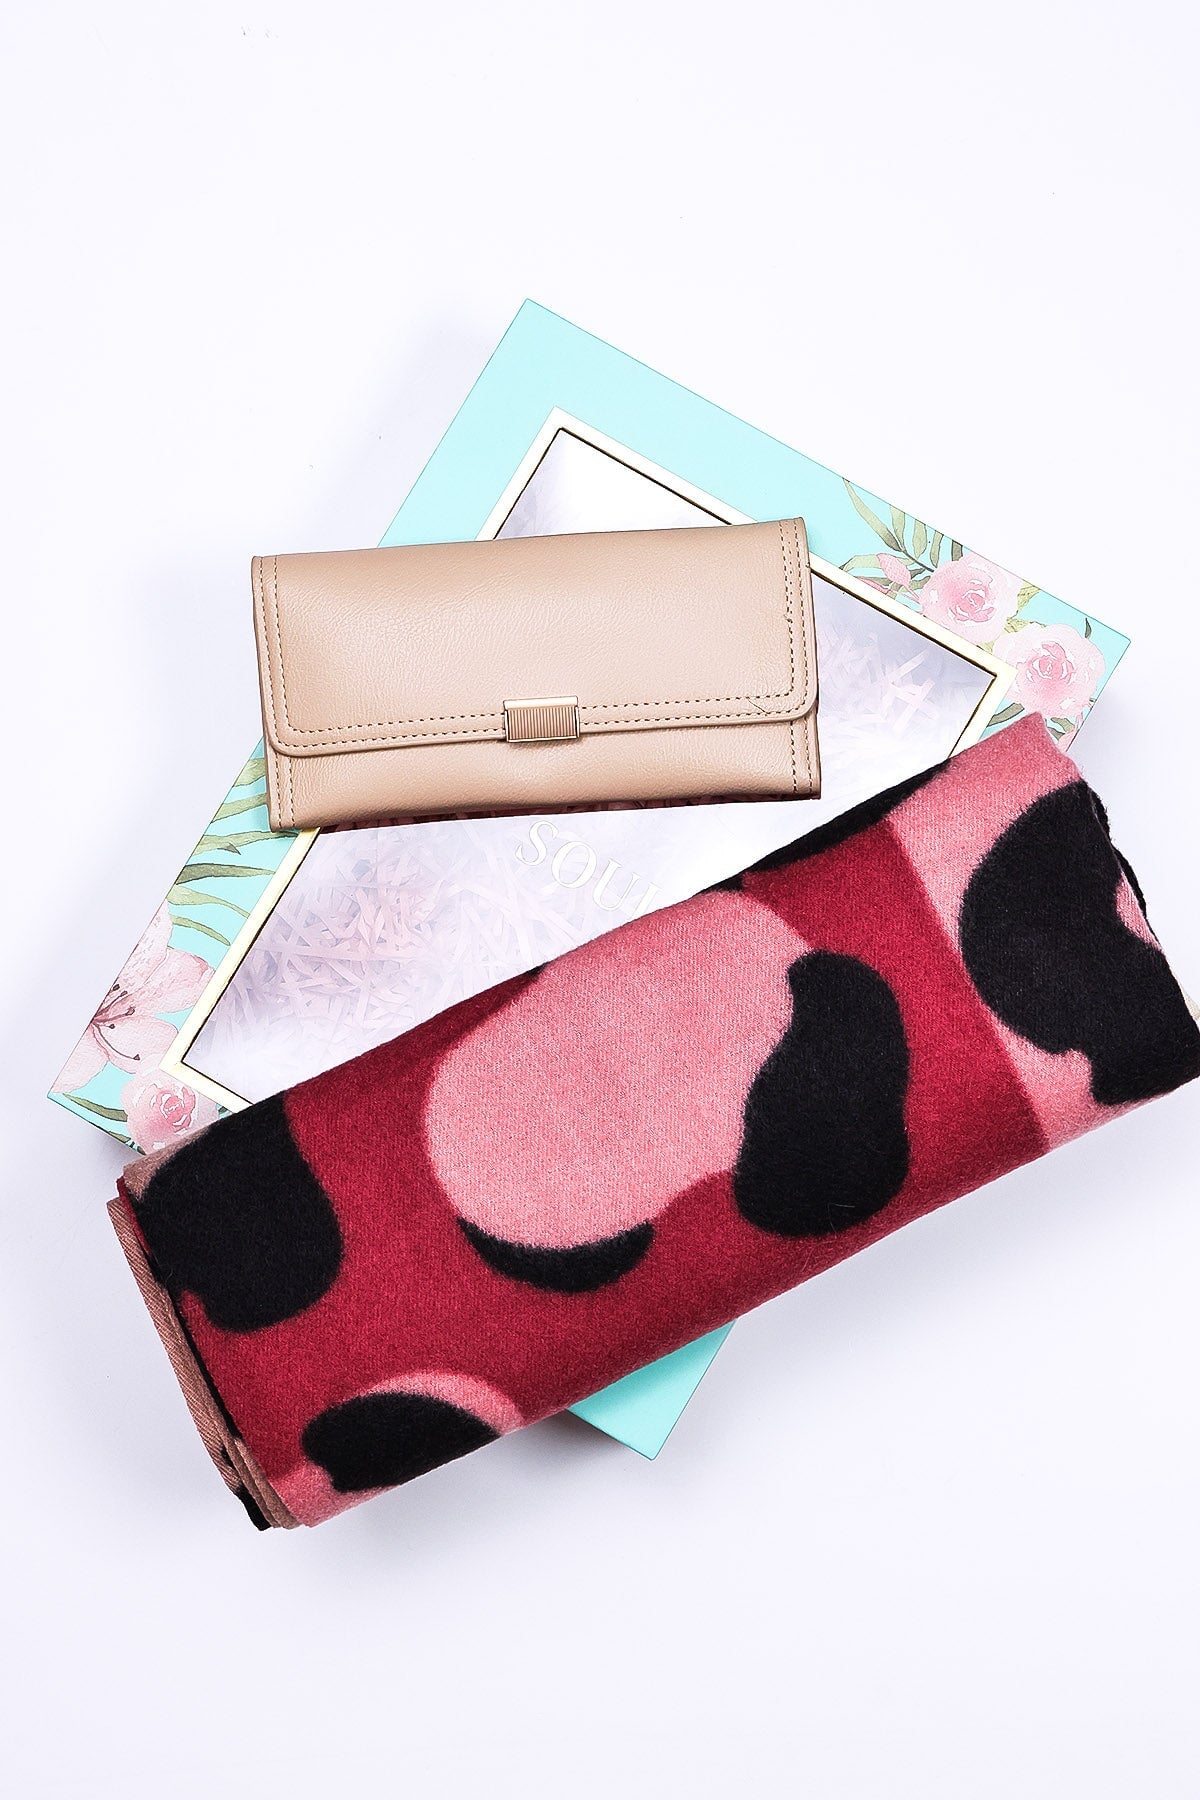 Luxury Pink Twilly Scarf For Bag For Women Designer Handbag With Headband  And Decorative Purse Material Fashionable Street Shopping Accessory PJ079  C23 From Hgldhgate, $4.83 | DHgate.Com